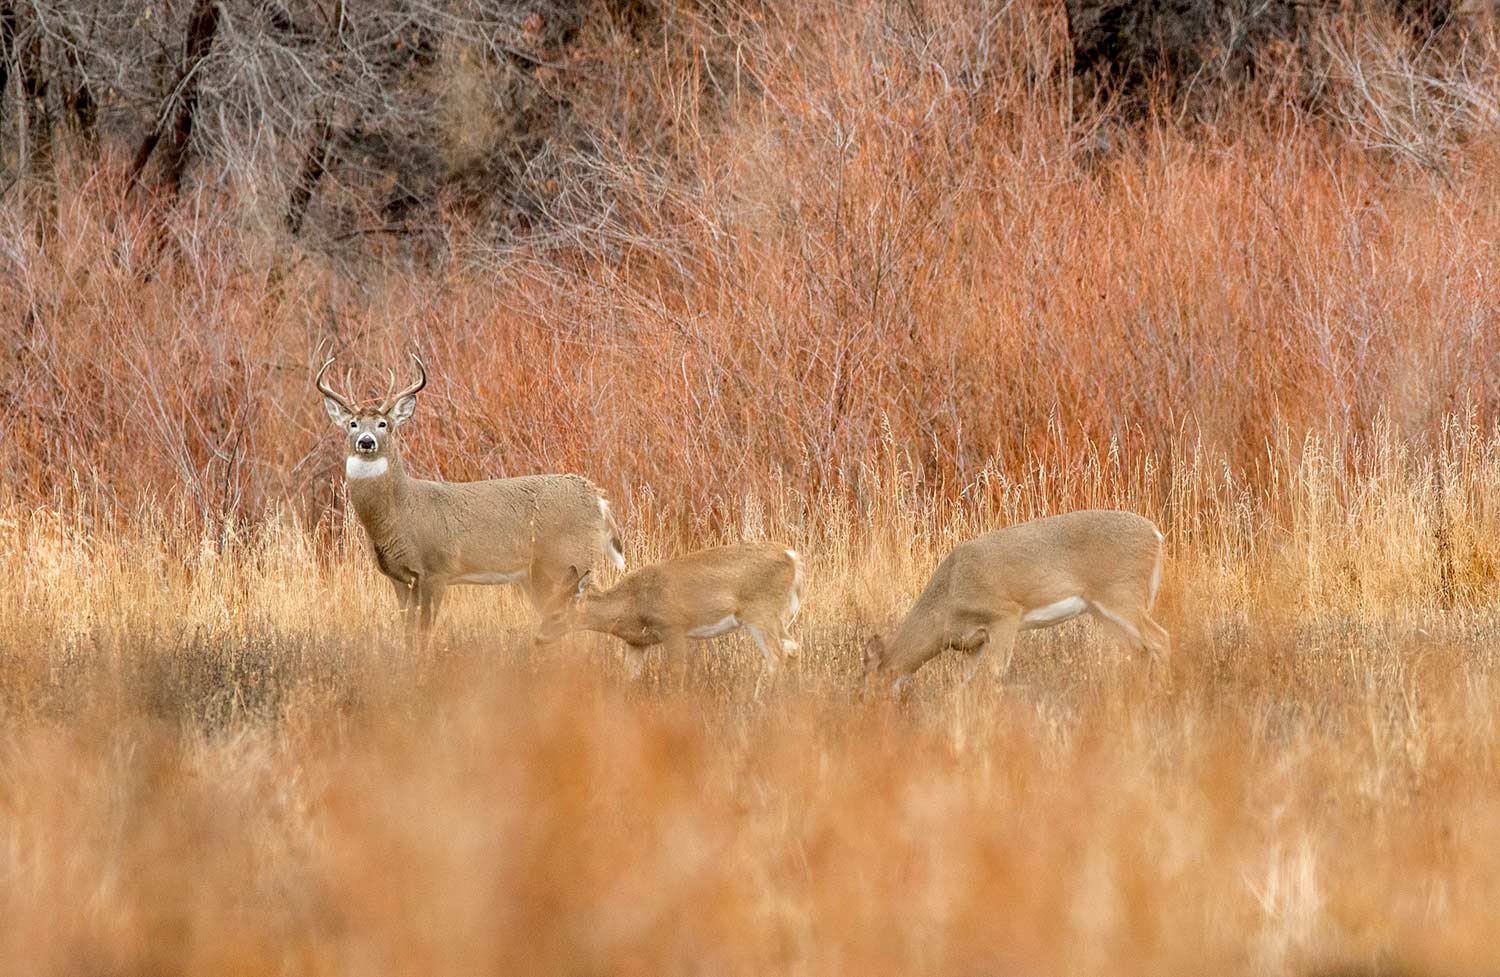 Three whitetail deer feed and roam in a large open field.